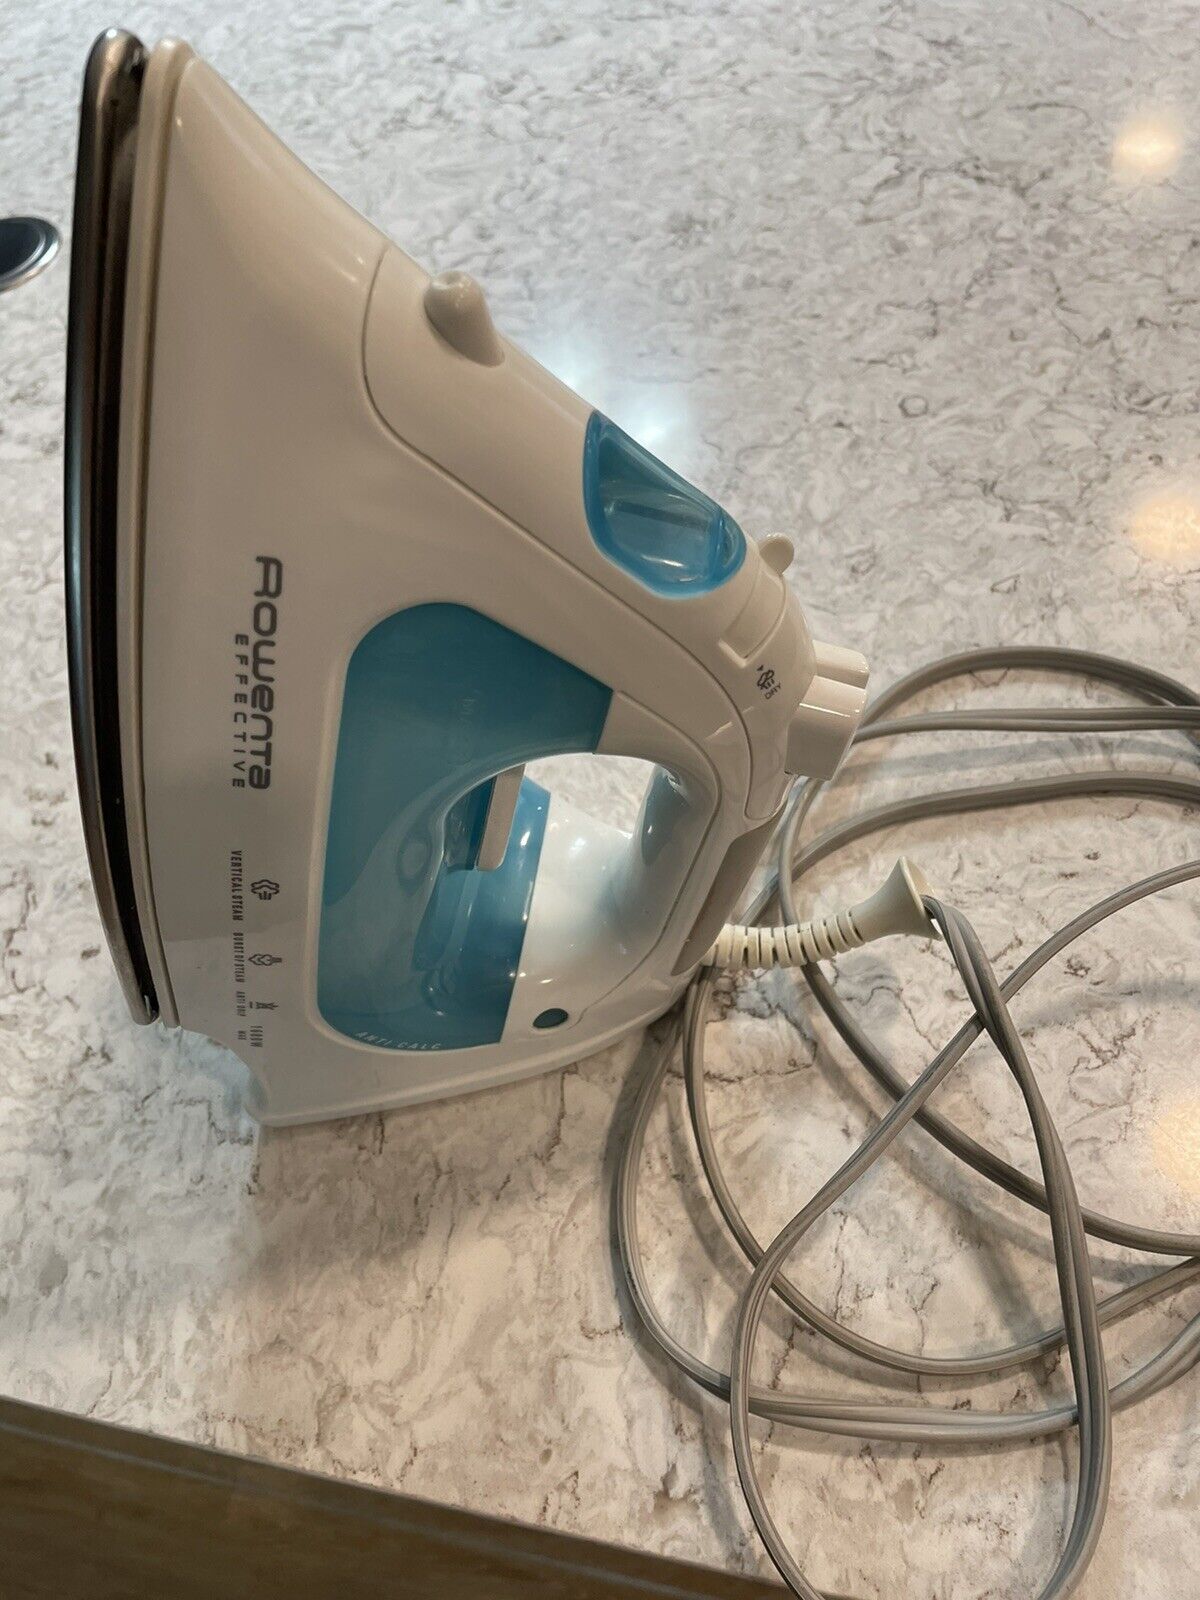 Rowenta Effective Comfort Professional Steam Iron 1600w  Preowned Works #dx1700